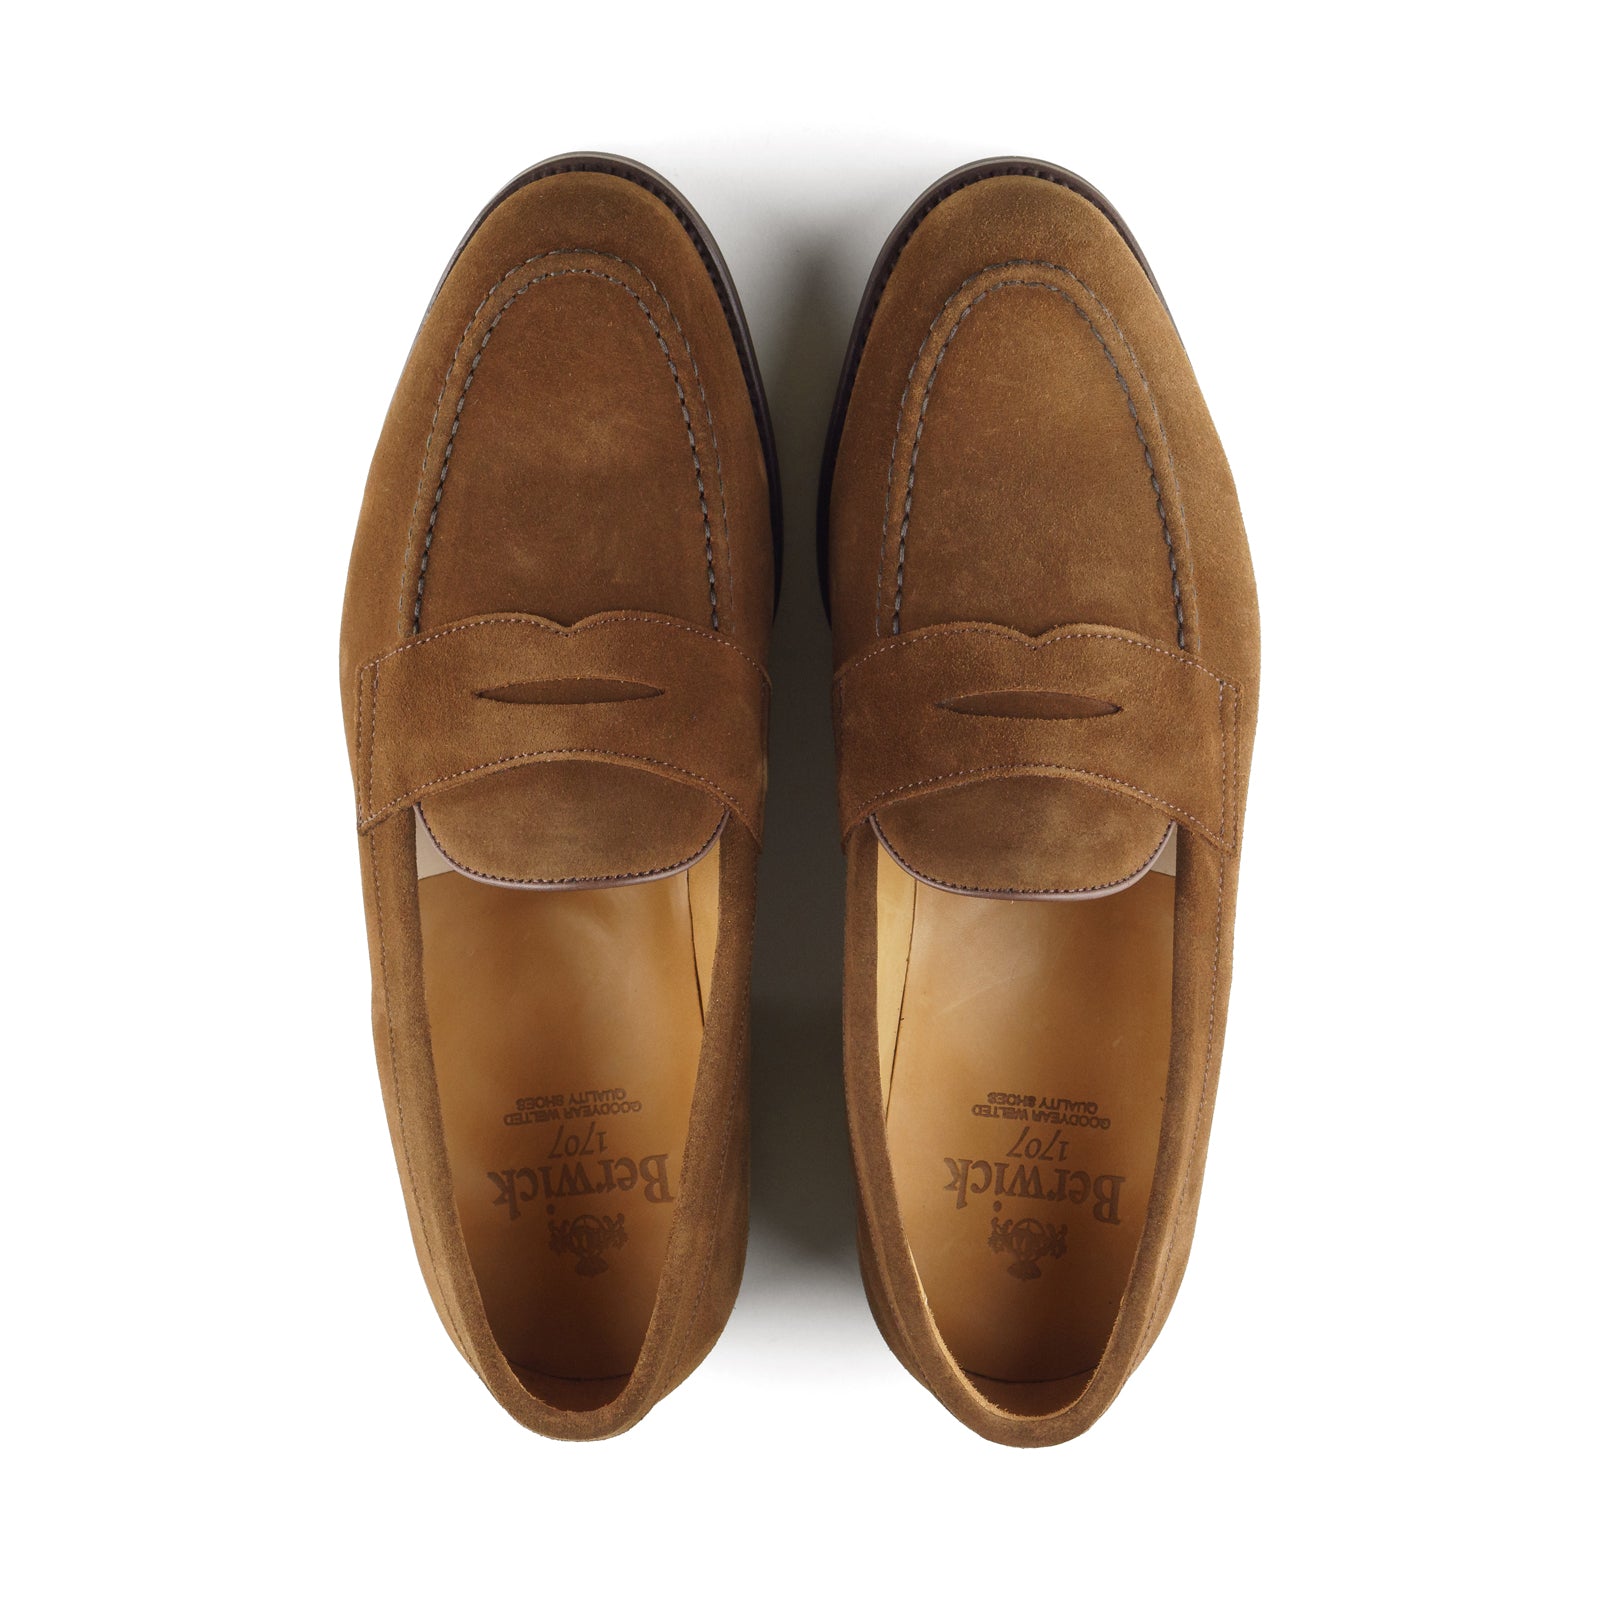 Style 9628 - Snuff Superbuck Suede